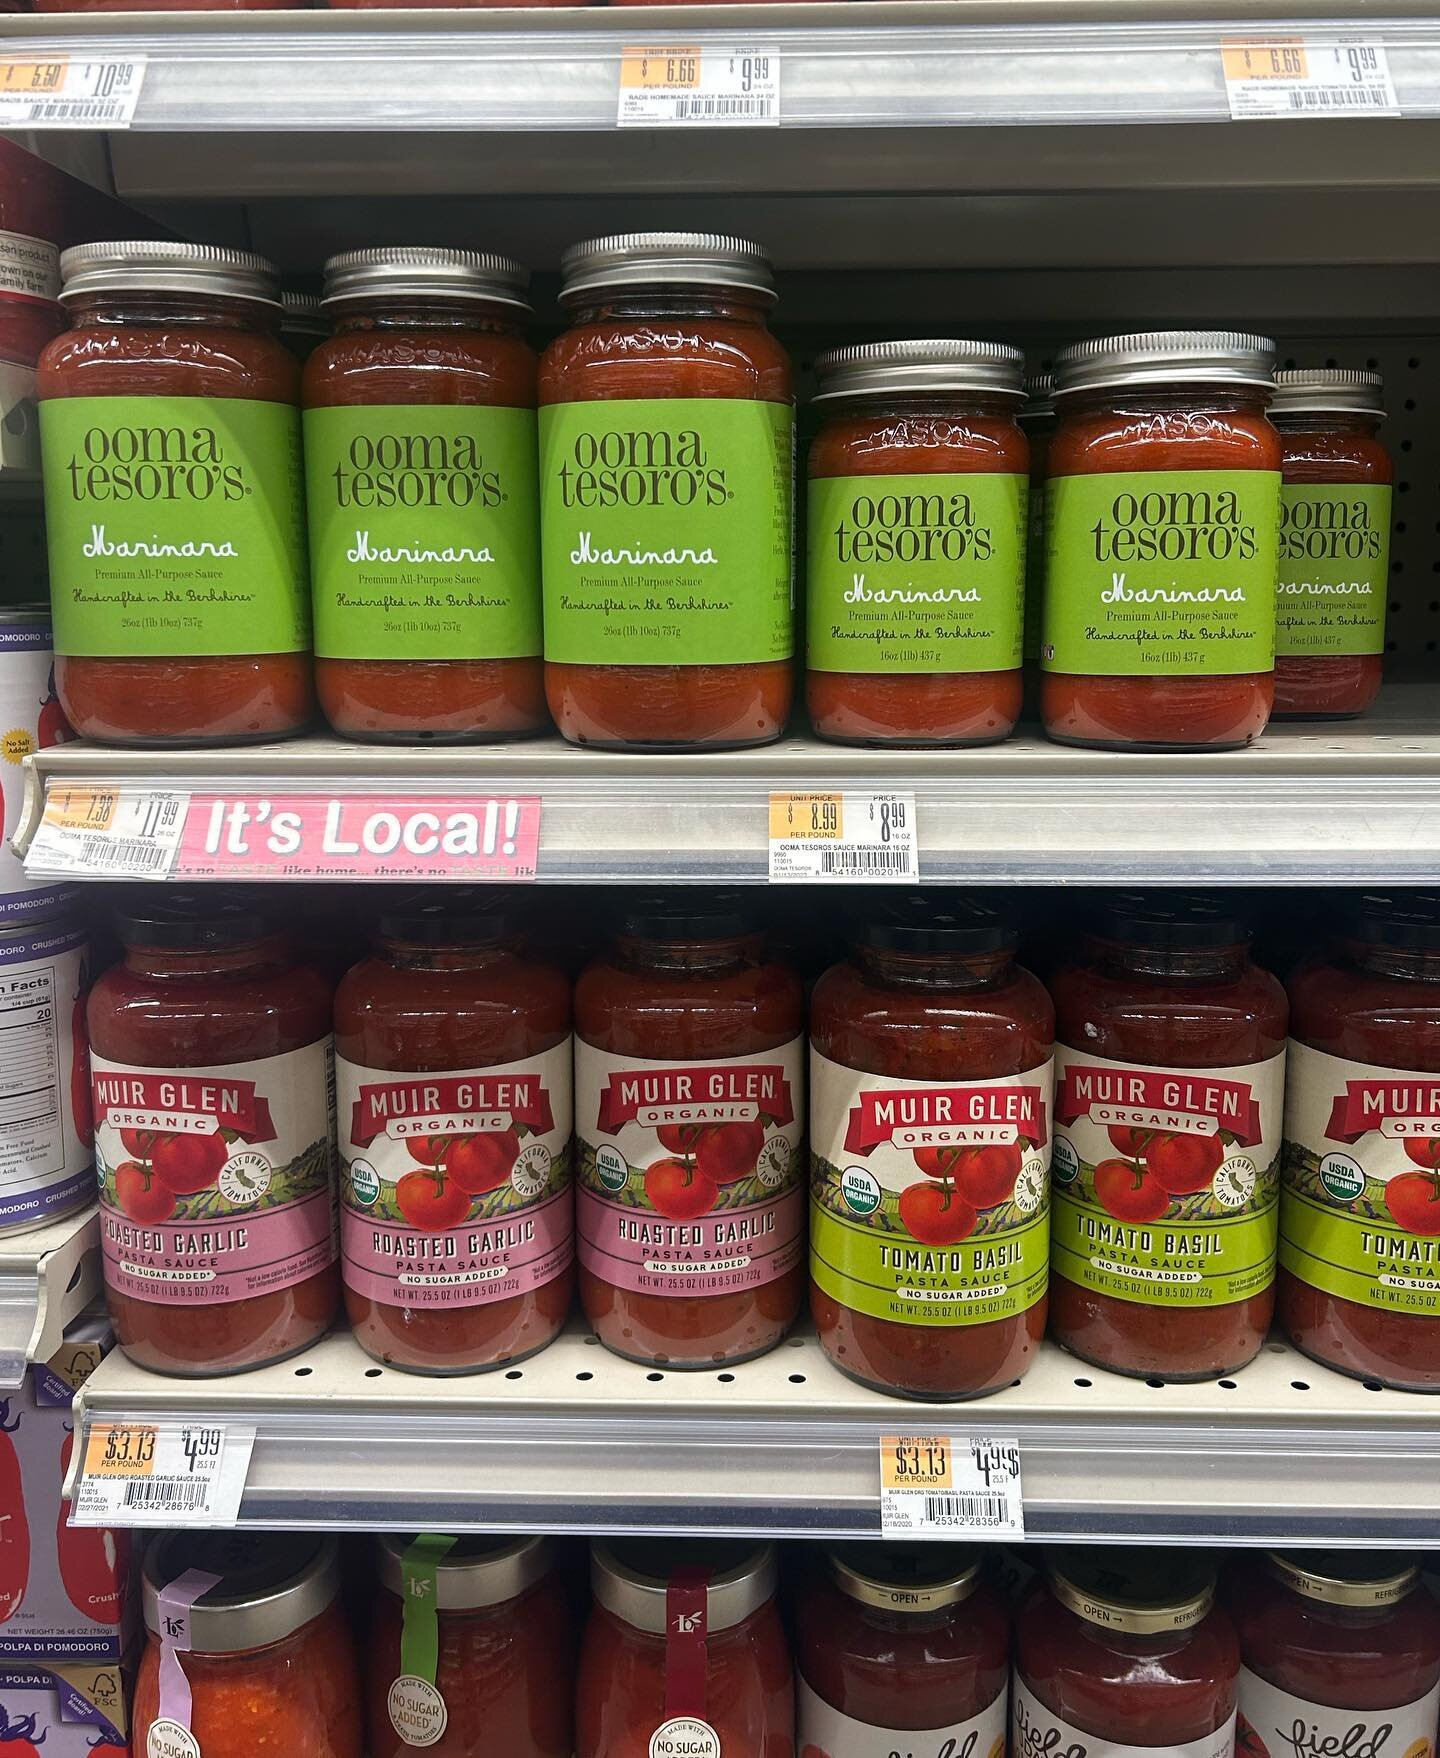 Shout out to our wonderful long time partnership with @guidosfreshmarketplace 🥬🍇🥑 Thank you for keeping your beautiful shelves stocked with Ooma Tesoro&rsquo;s&reg;️ Marinara for all these years! We love working with you &hearts;️ #intheberkshires